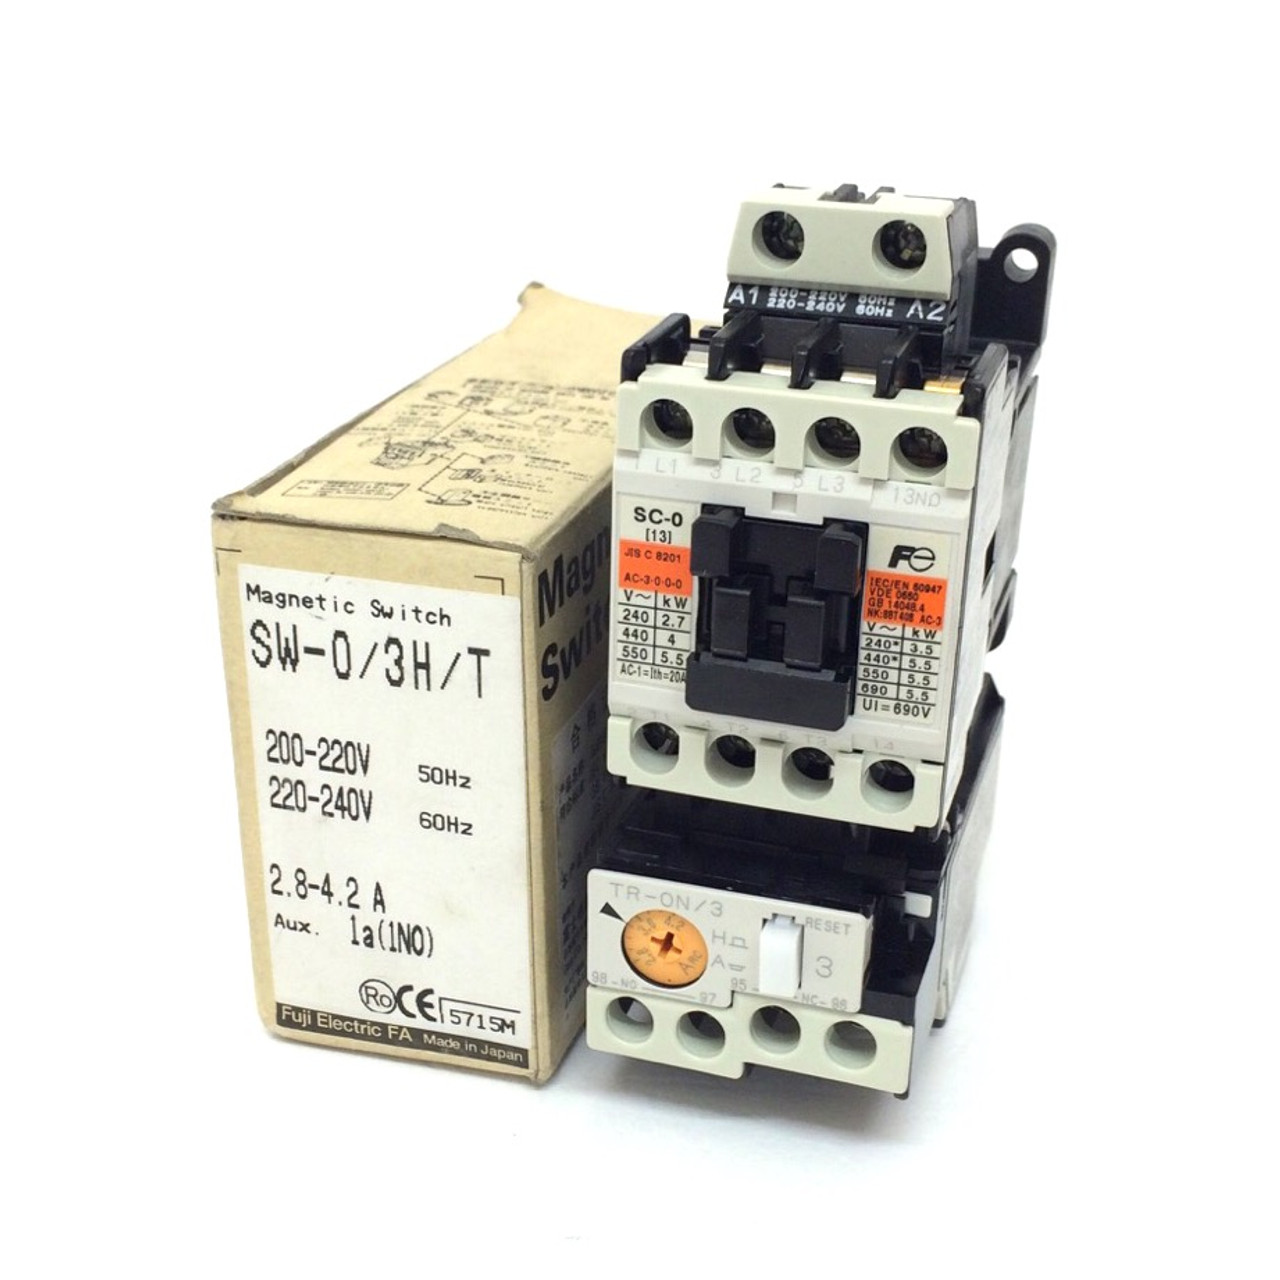 Magnetic Switch SW-0/3H/T-4.2A Fuji SC-0(13)-1a + TR-0N/3 - Axxa